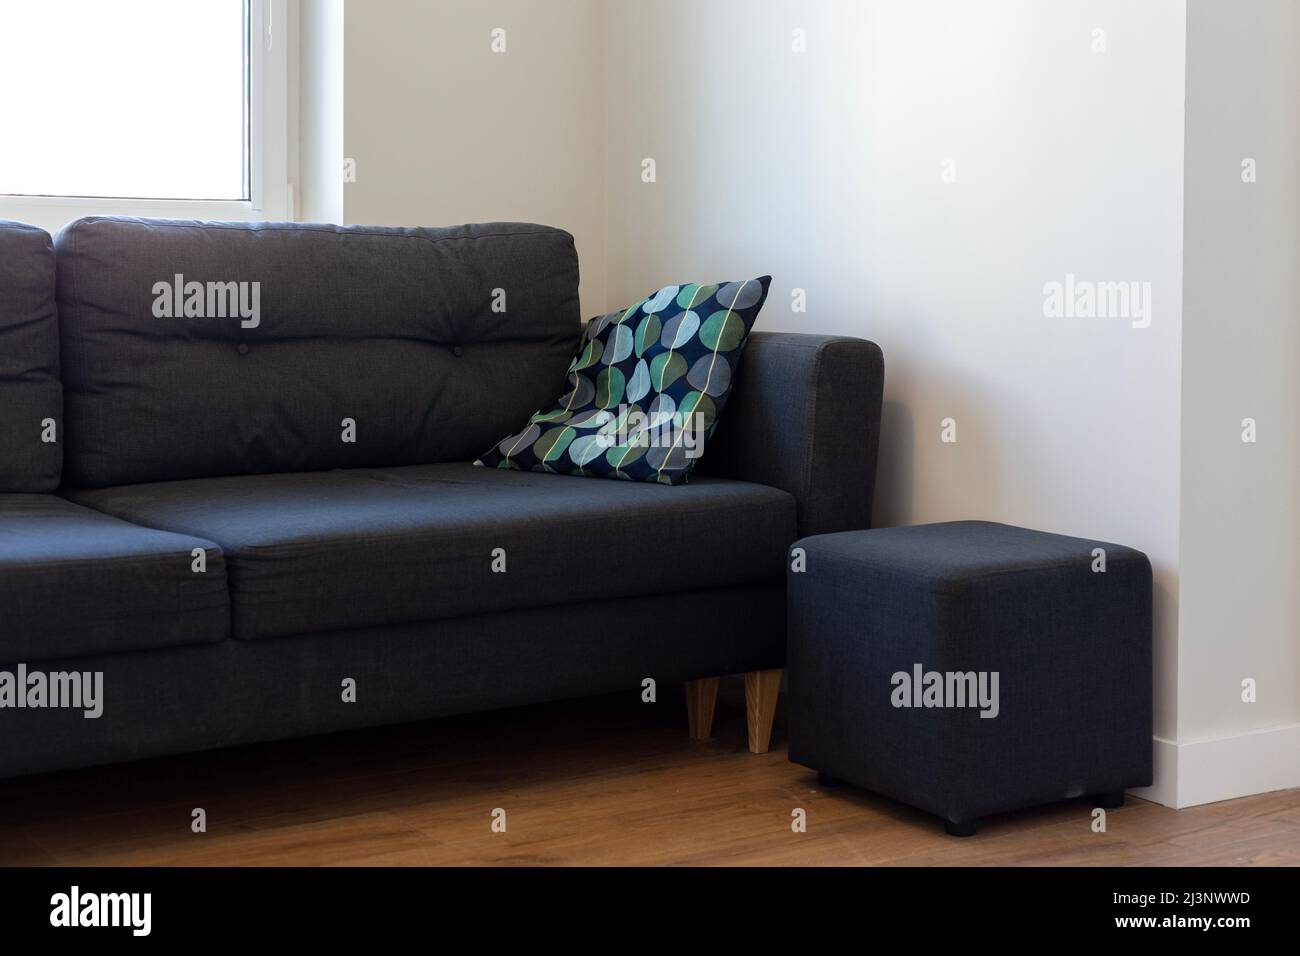 Dark blue sofa with blue and turquoise cushion in a white room Stock Photo